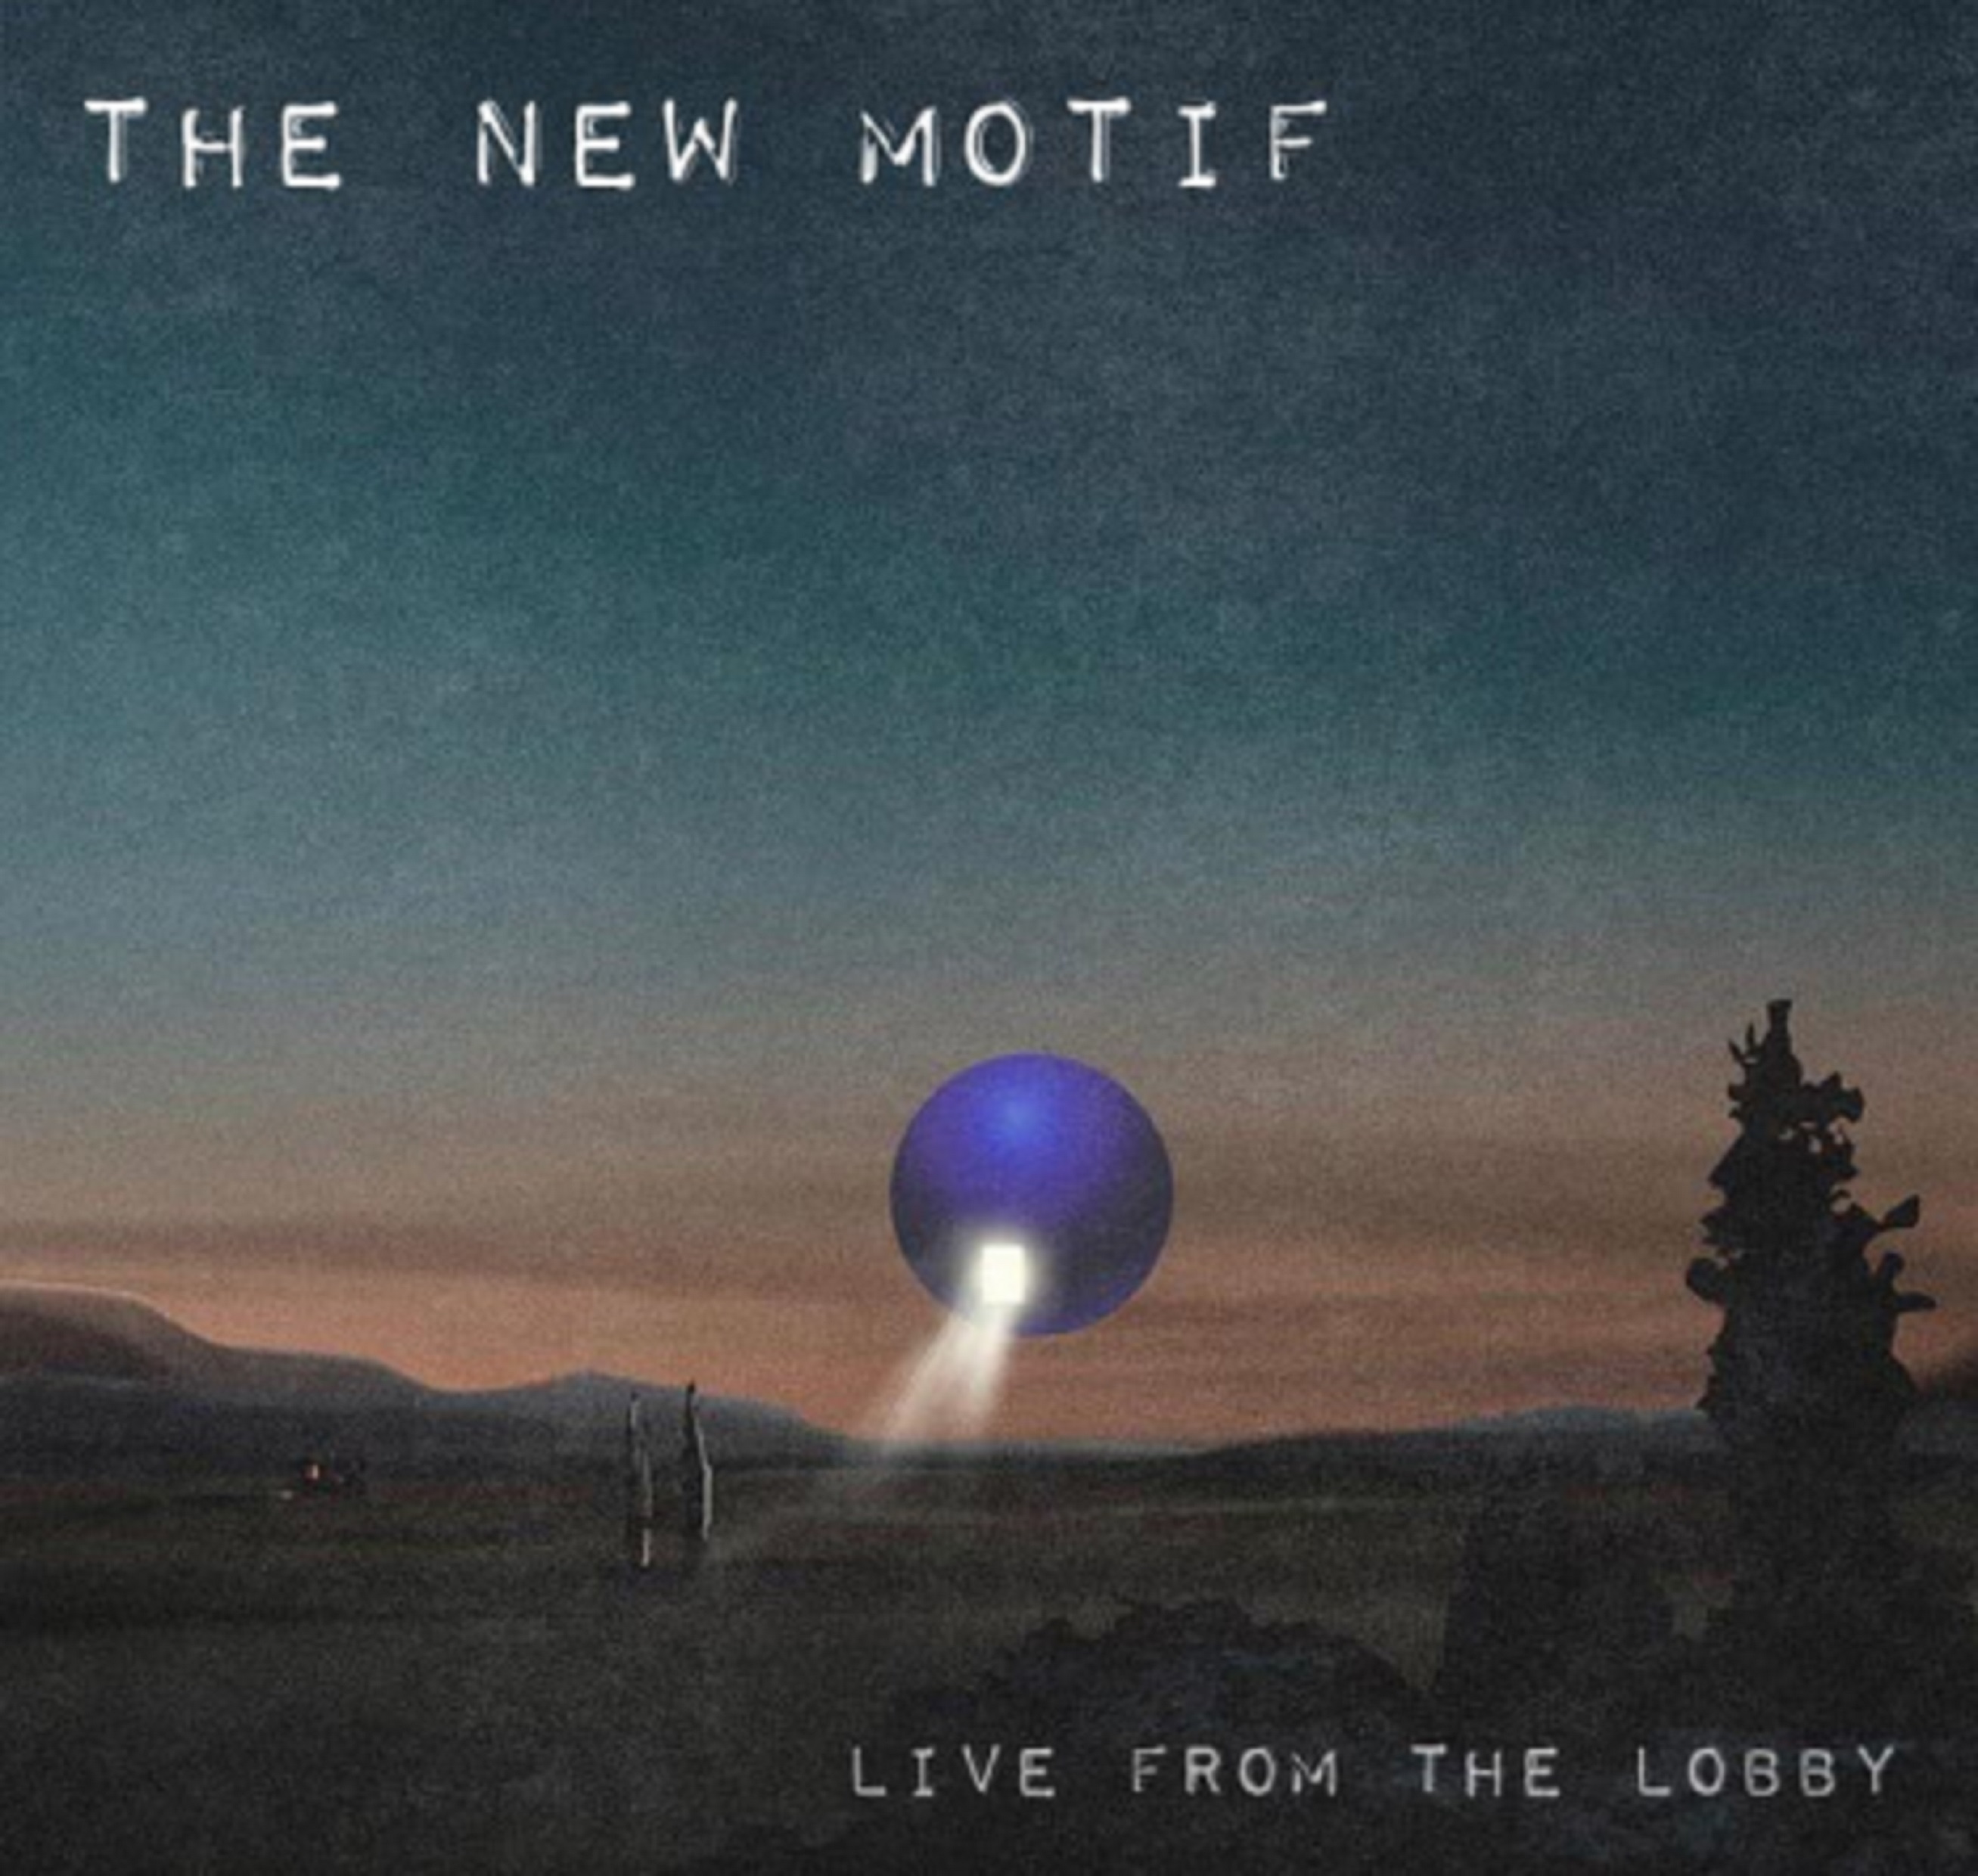 The New Motif Announce Live Album & Spring Outdoor Residency